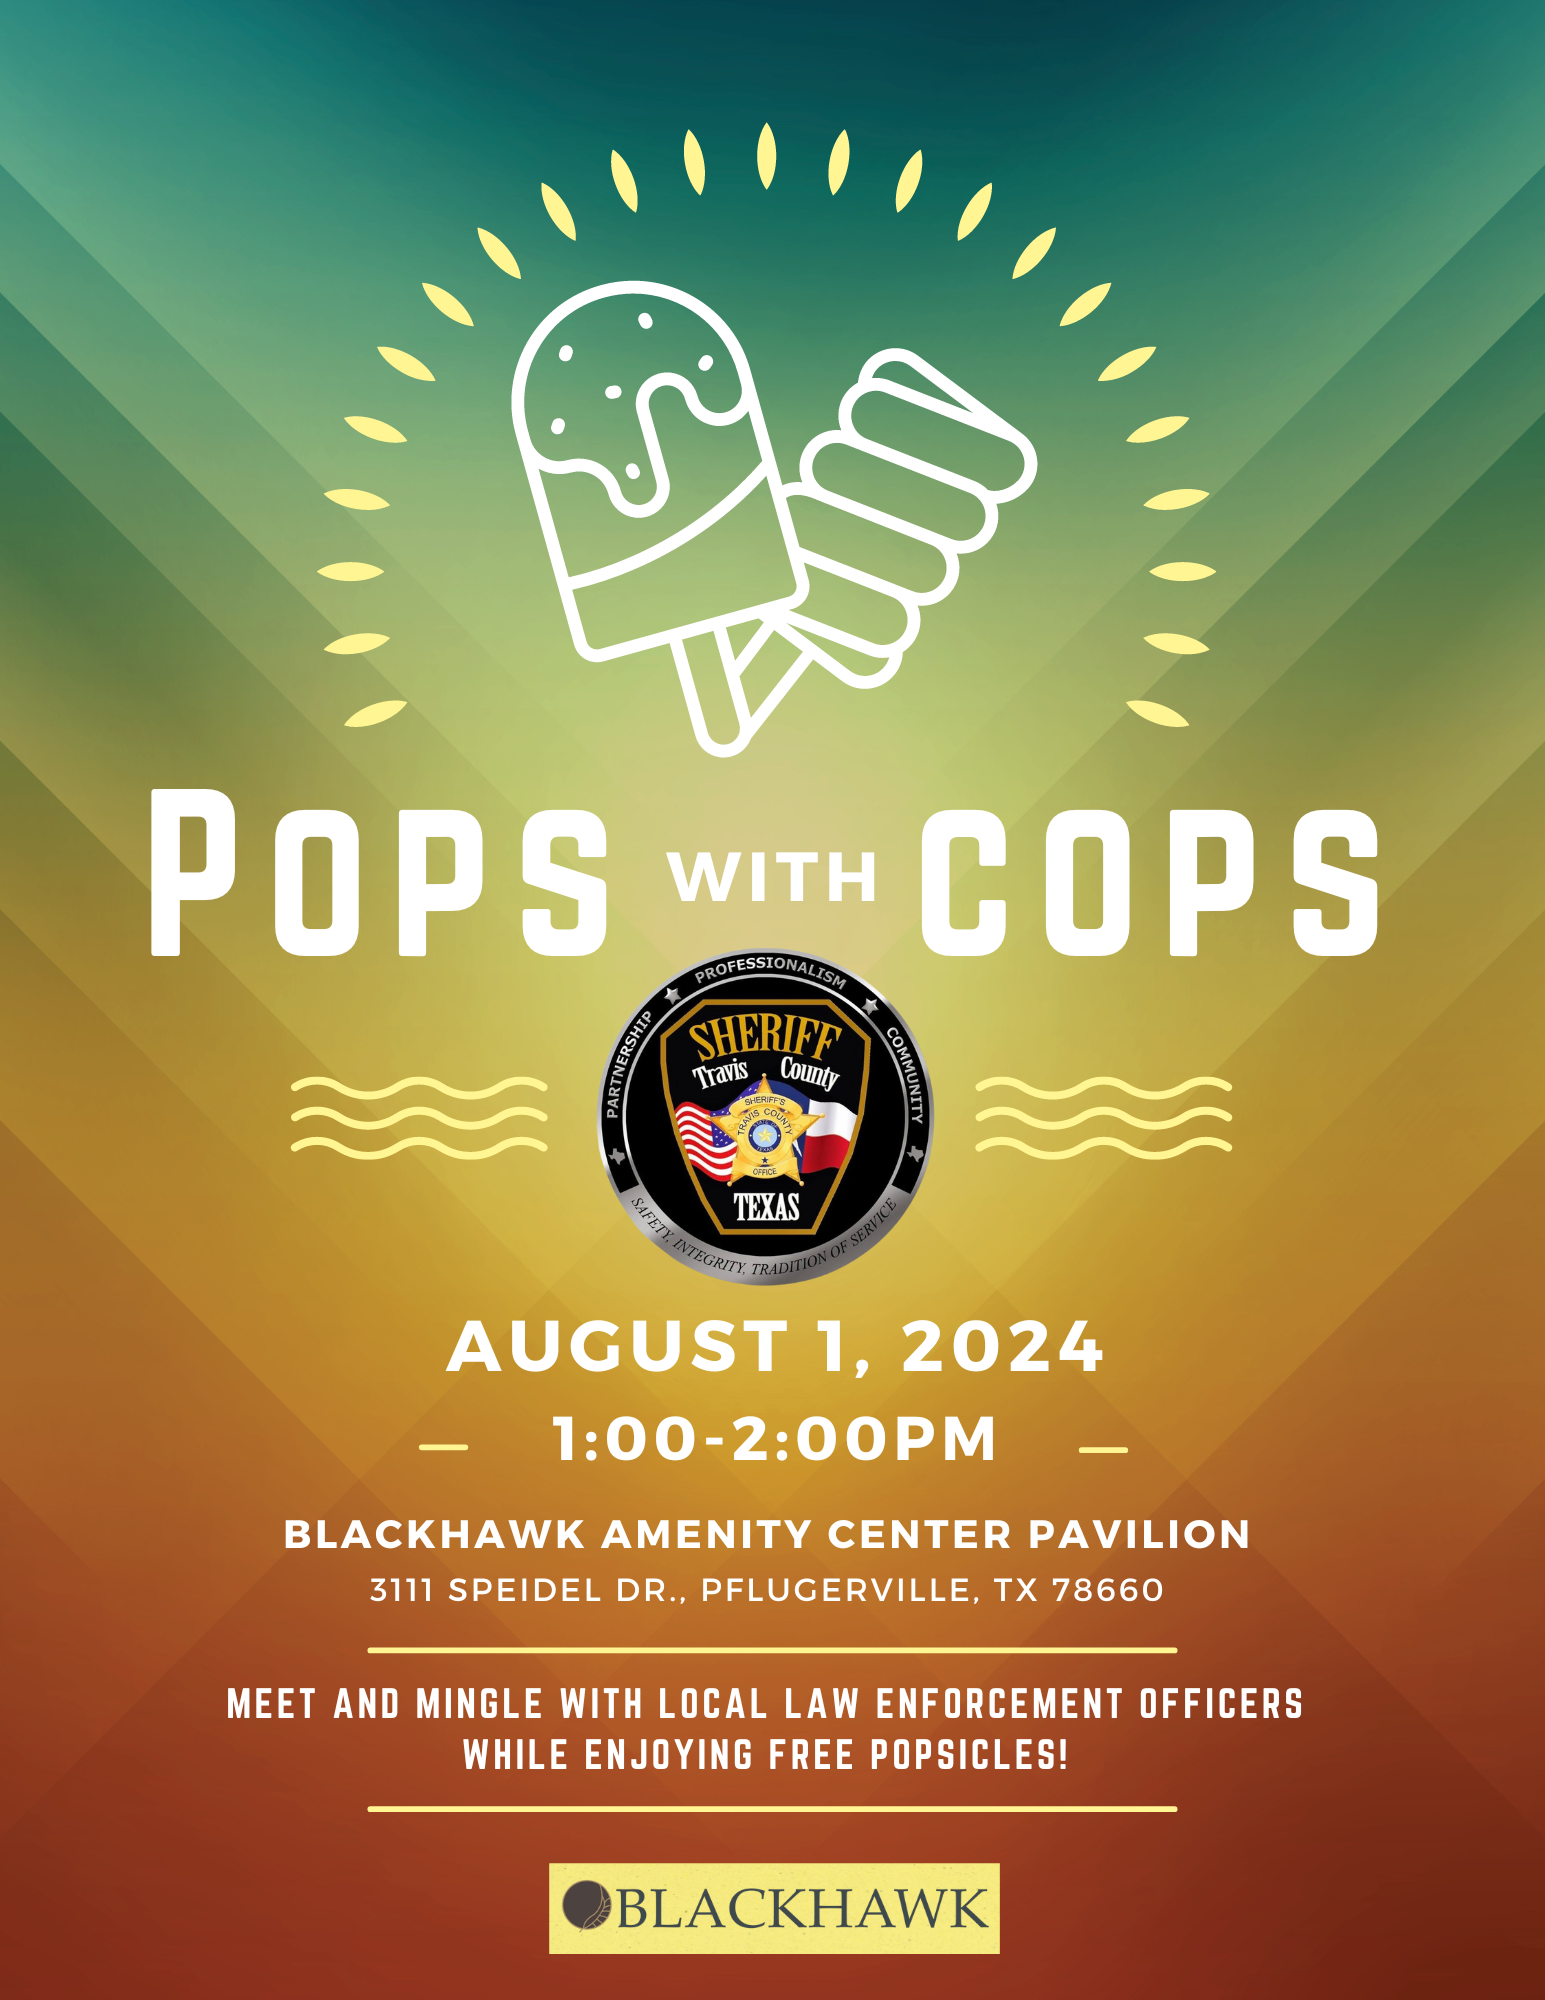 A flyer for an event called "Pops with Cops" featuring a background gradient from teal to orange with an image of popsicles. The flyer includes the Travis County Sheriff's Office badge and details about the event.